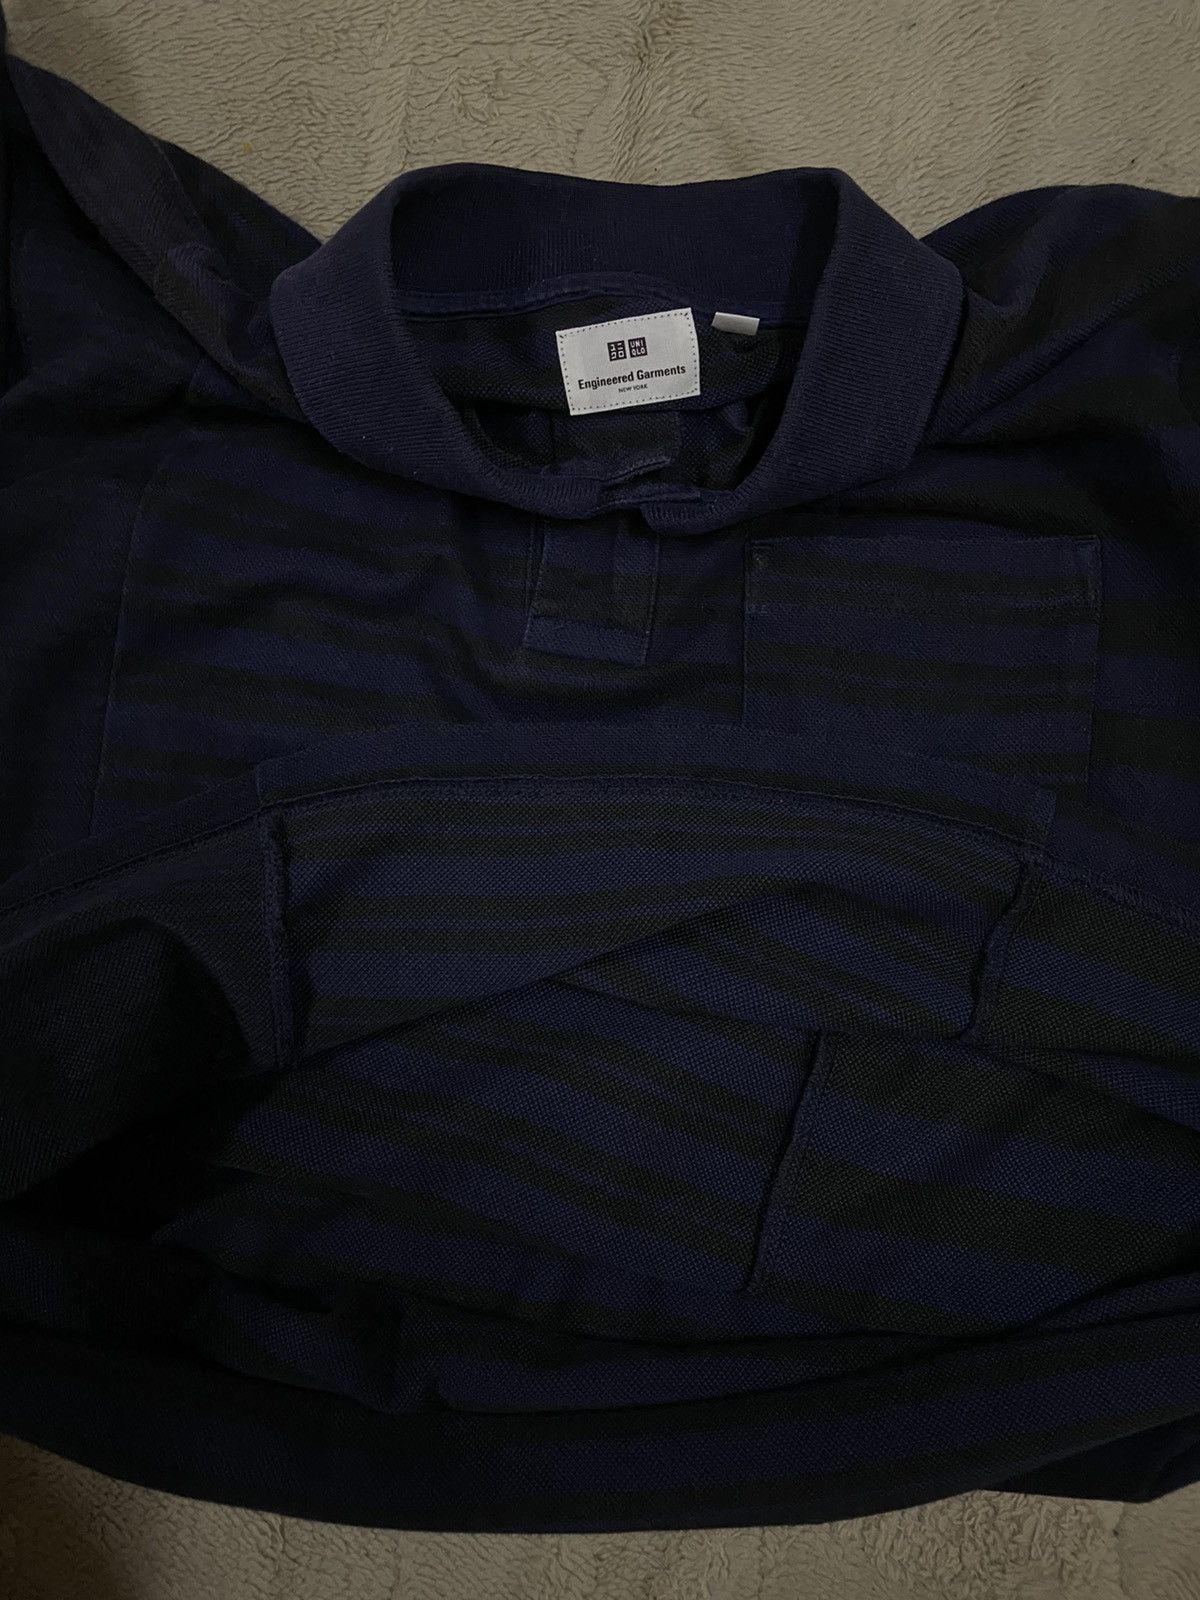 Rare Enginereed Garment Uniqlo Reconstructed Striped Pocket - 18